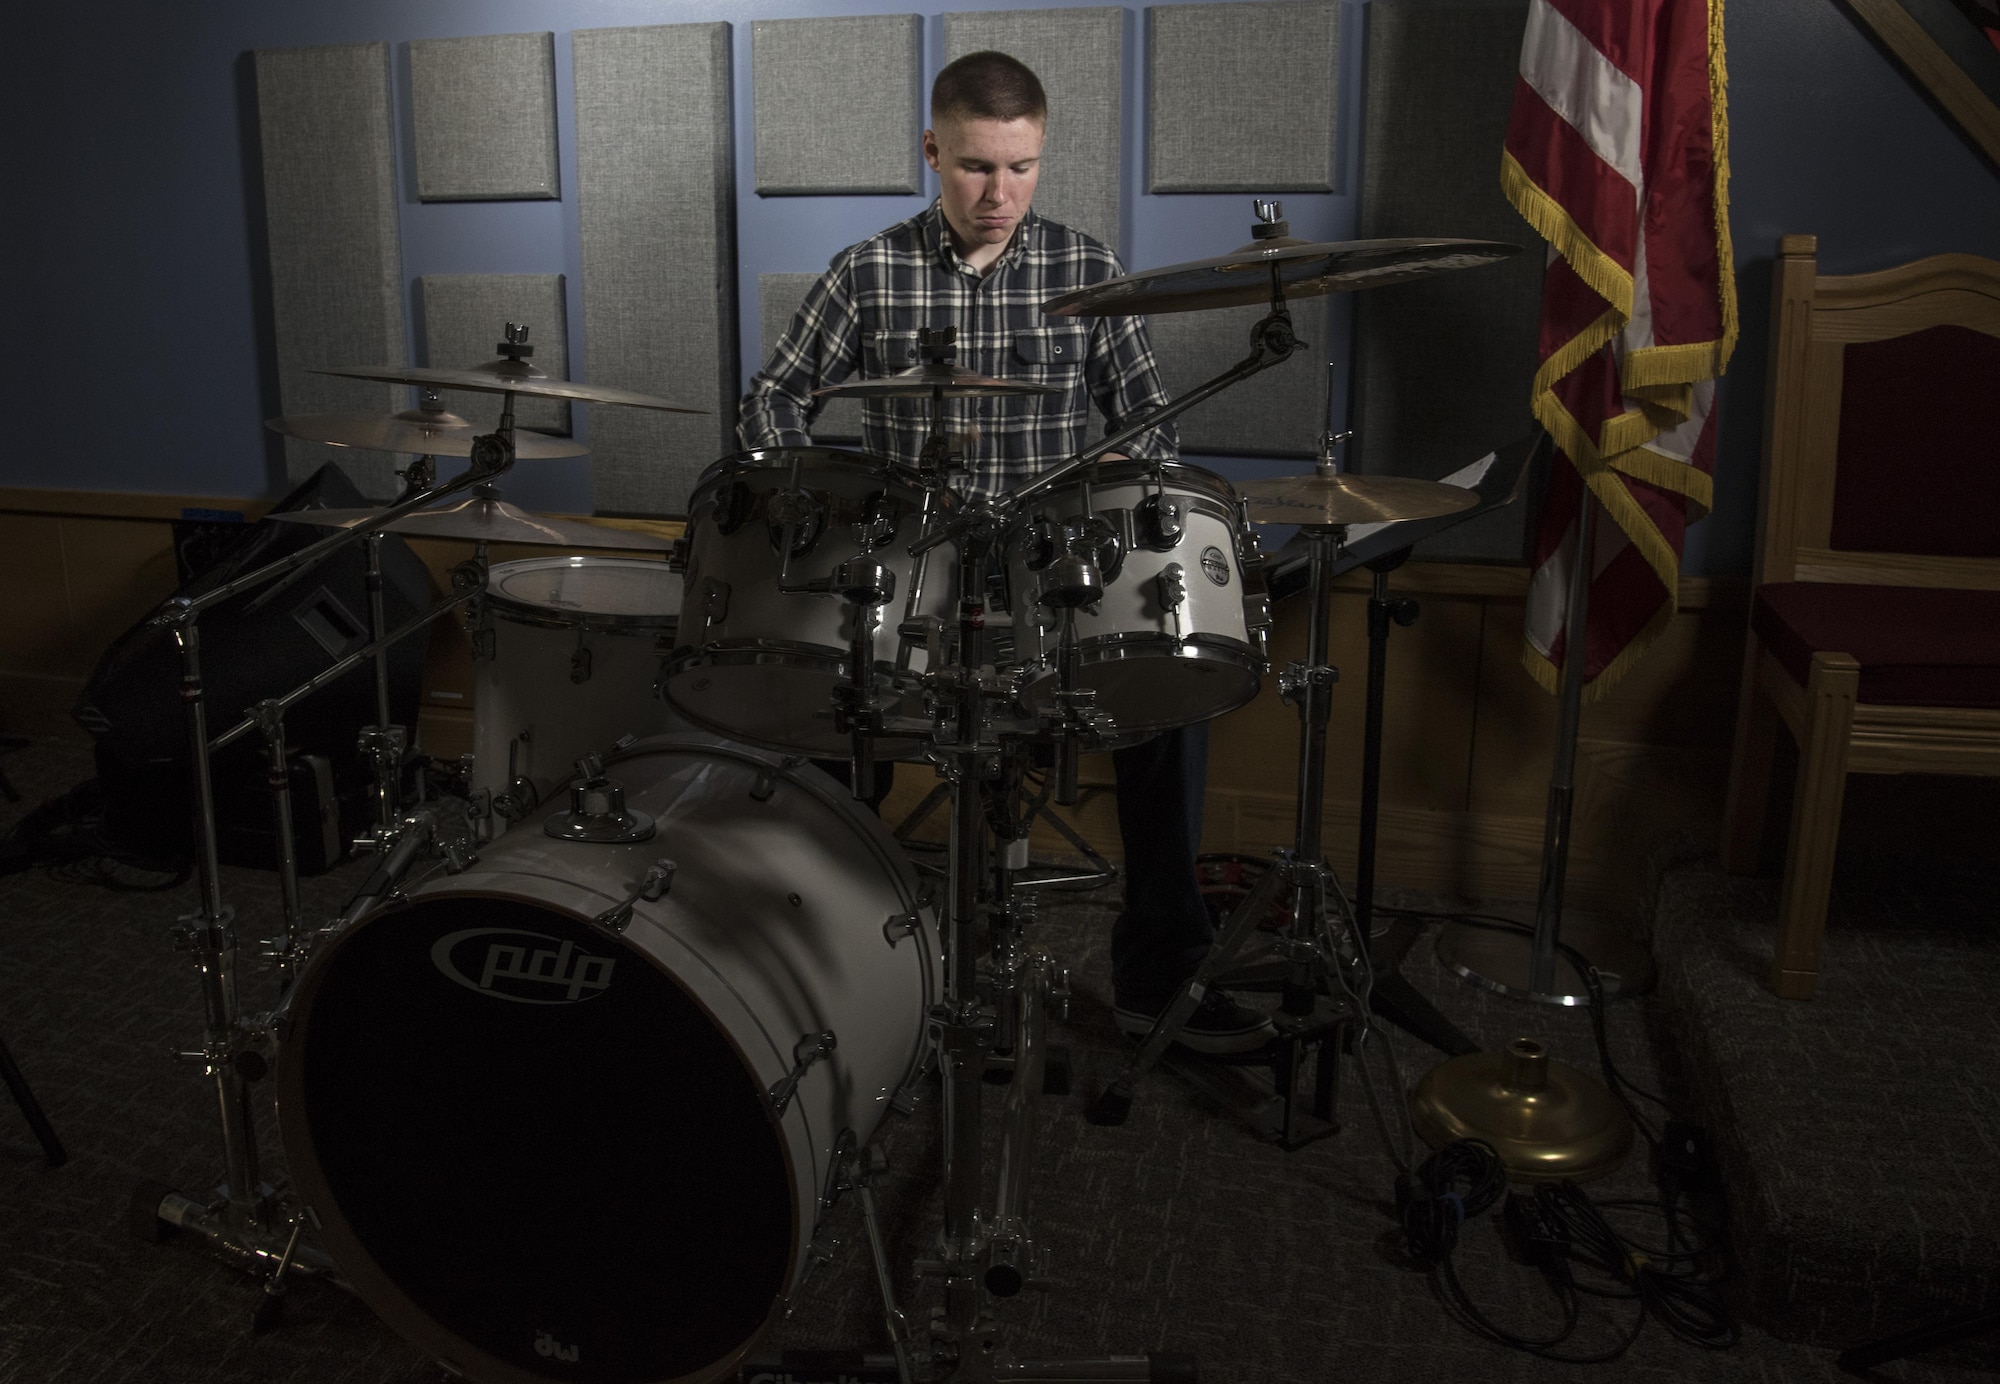 Airman drummer beats adversity with style